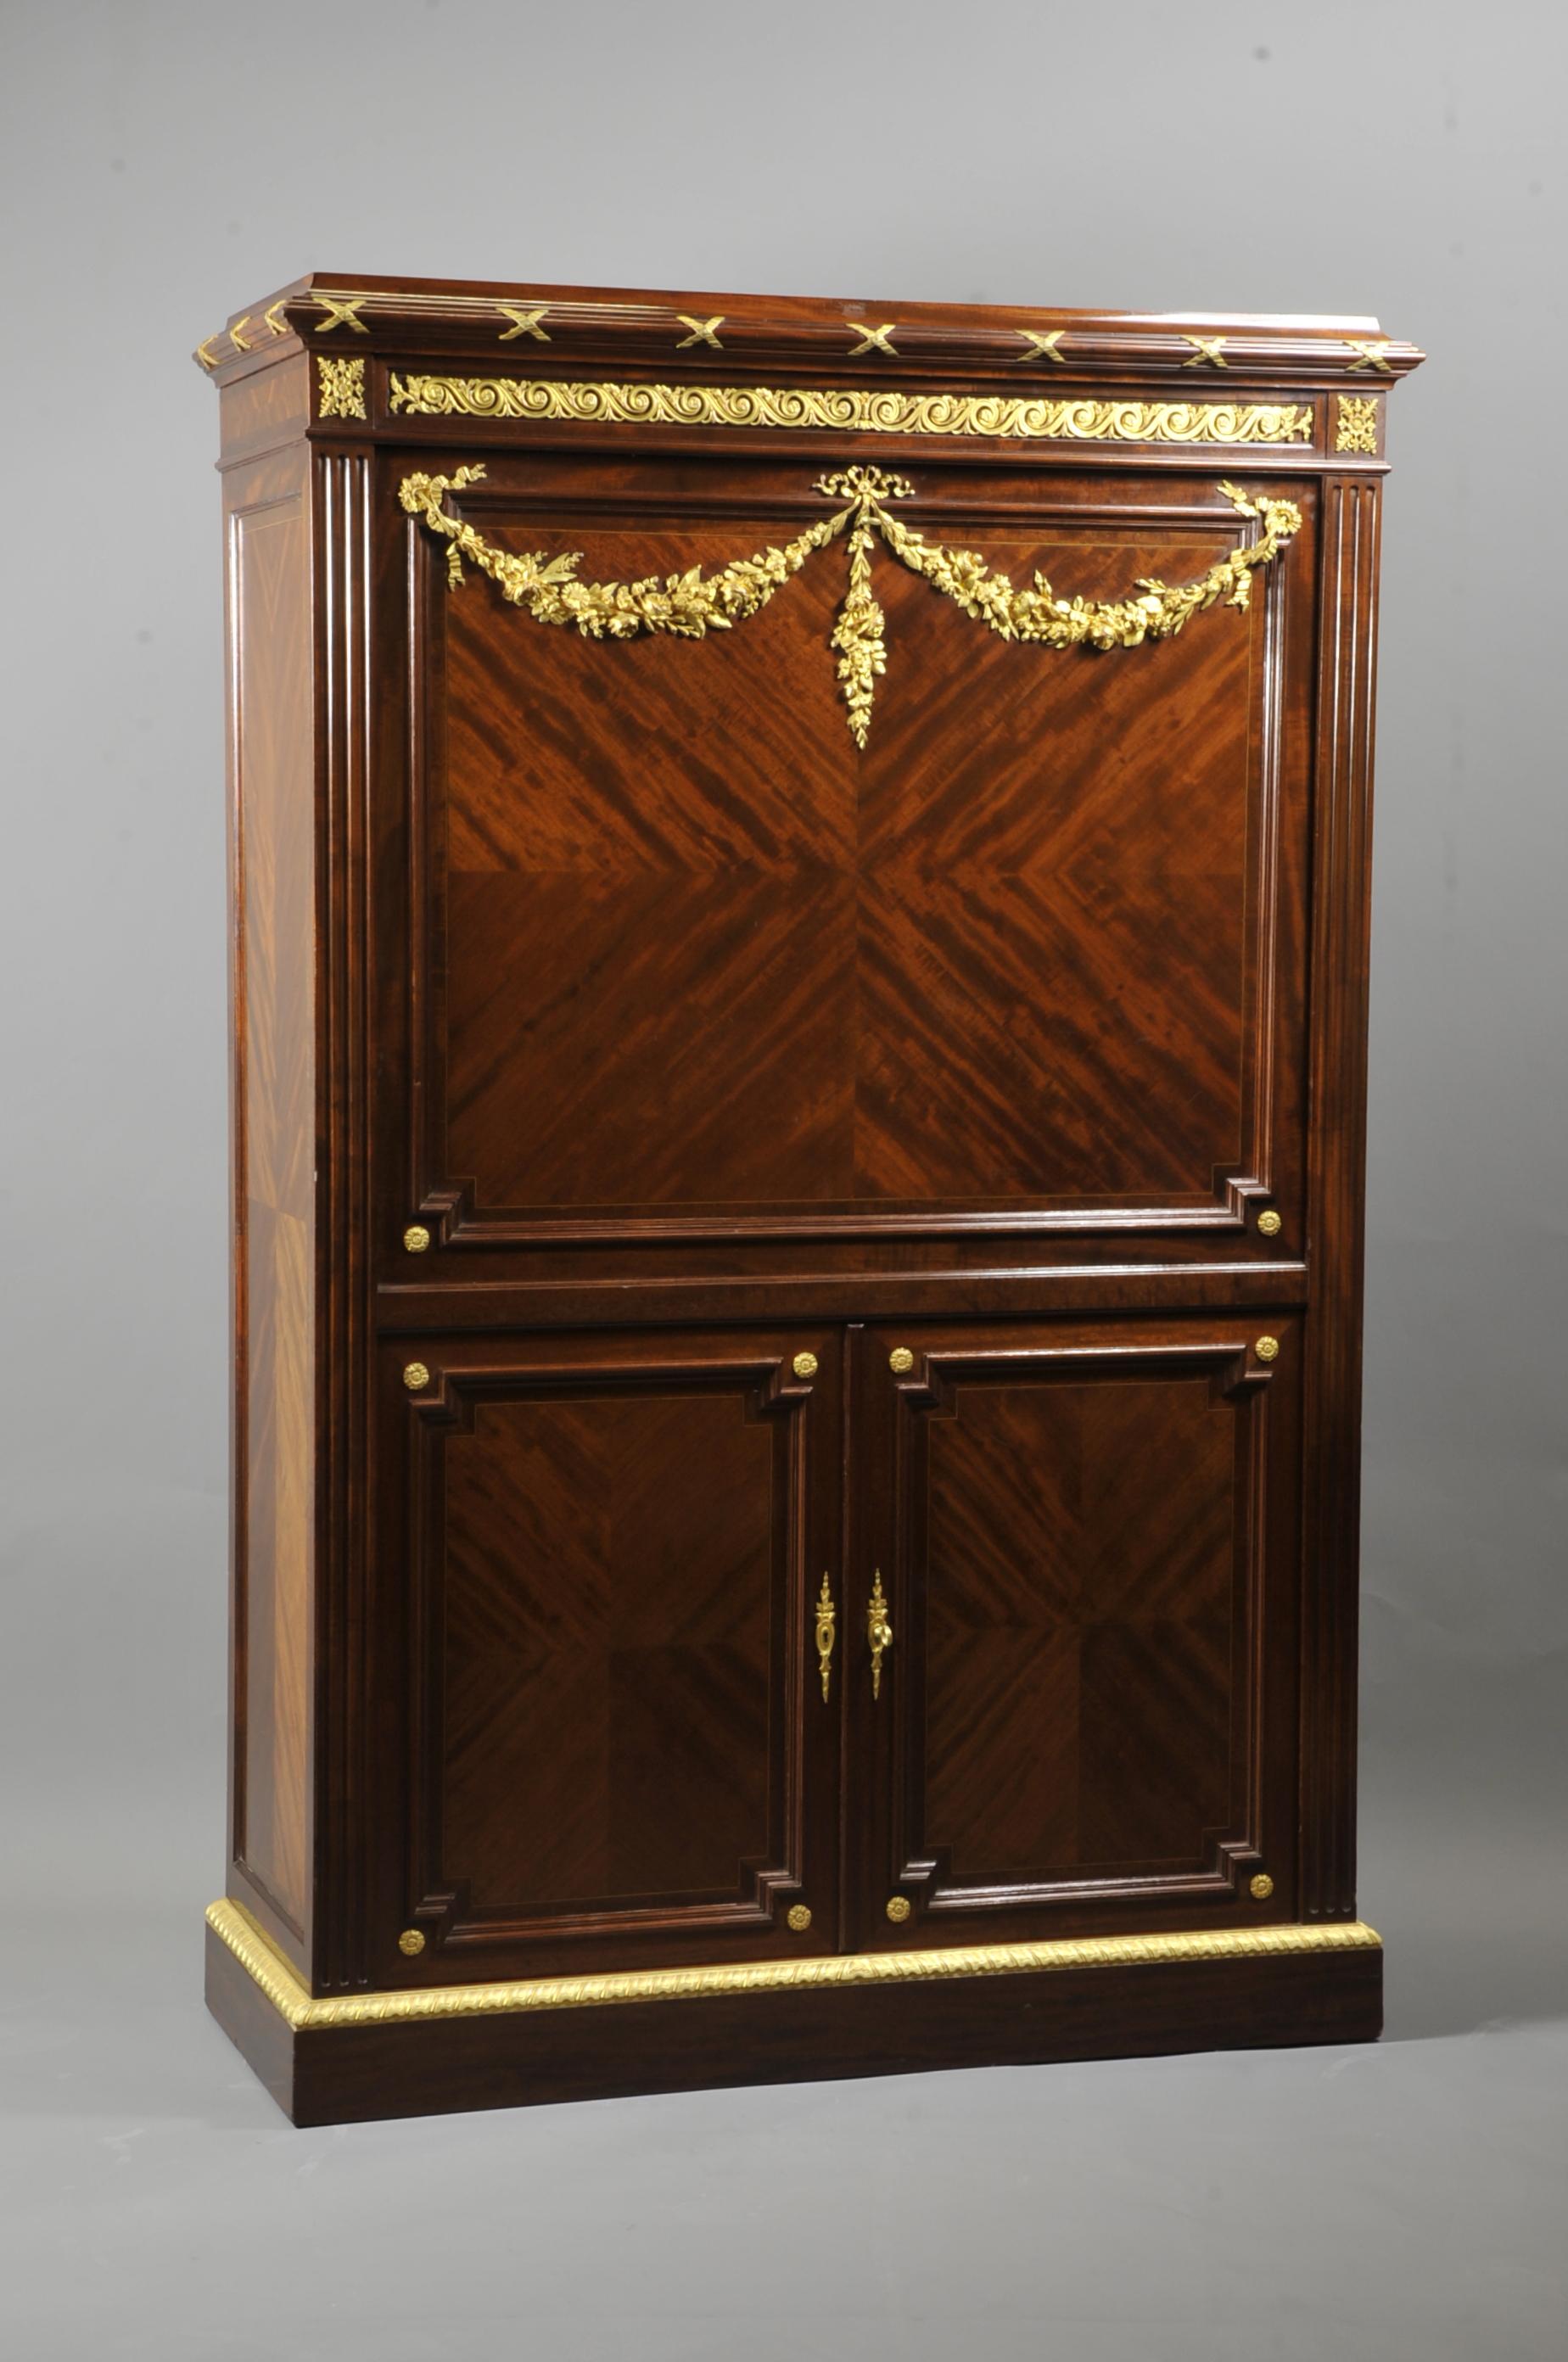 Large Louis XVI style secretaire in mahogany marquetry in frames of light wood and ebony fillets, rich ornamentation of very finely chiseled gilt bronze such as flower garlands, interlacing friezes and gadroons, braces and masks.

Mounted on a